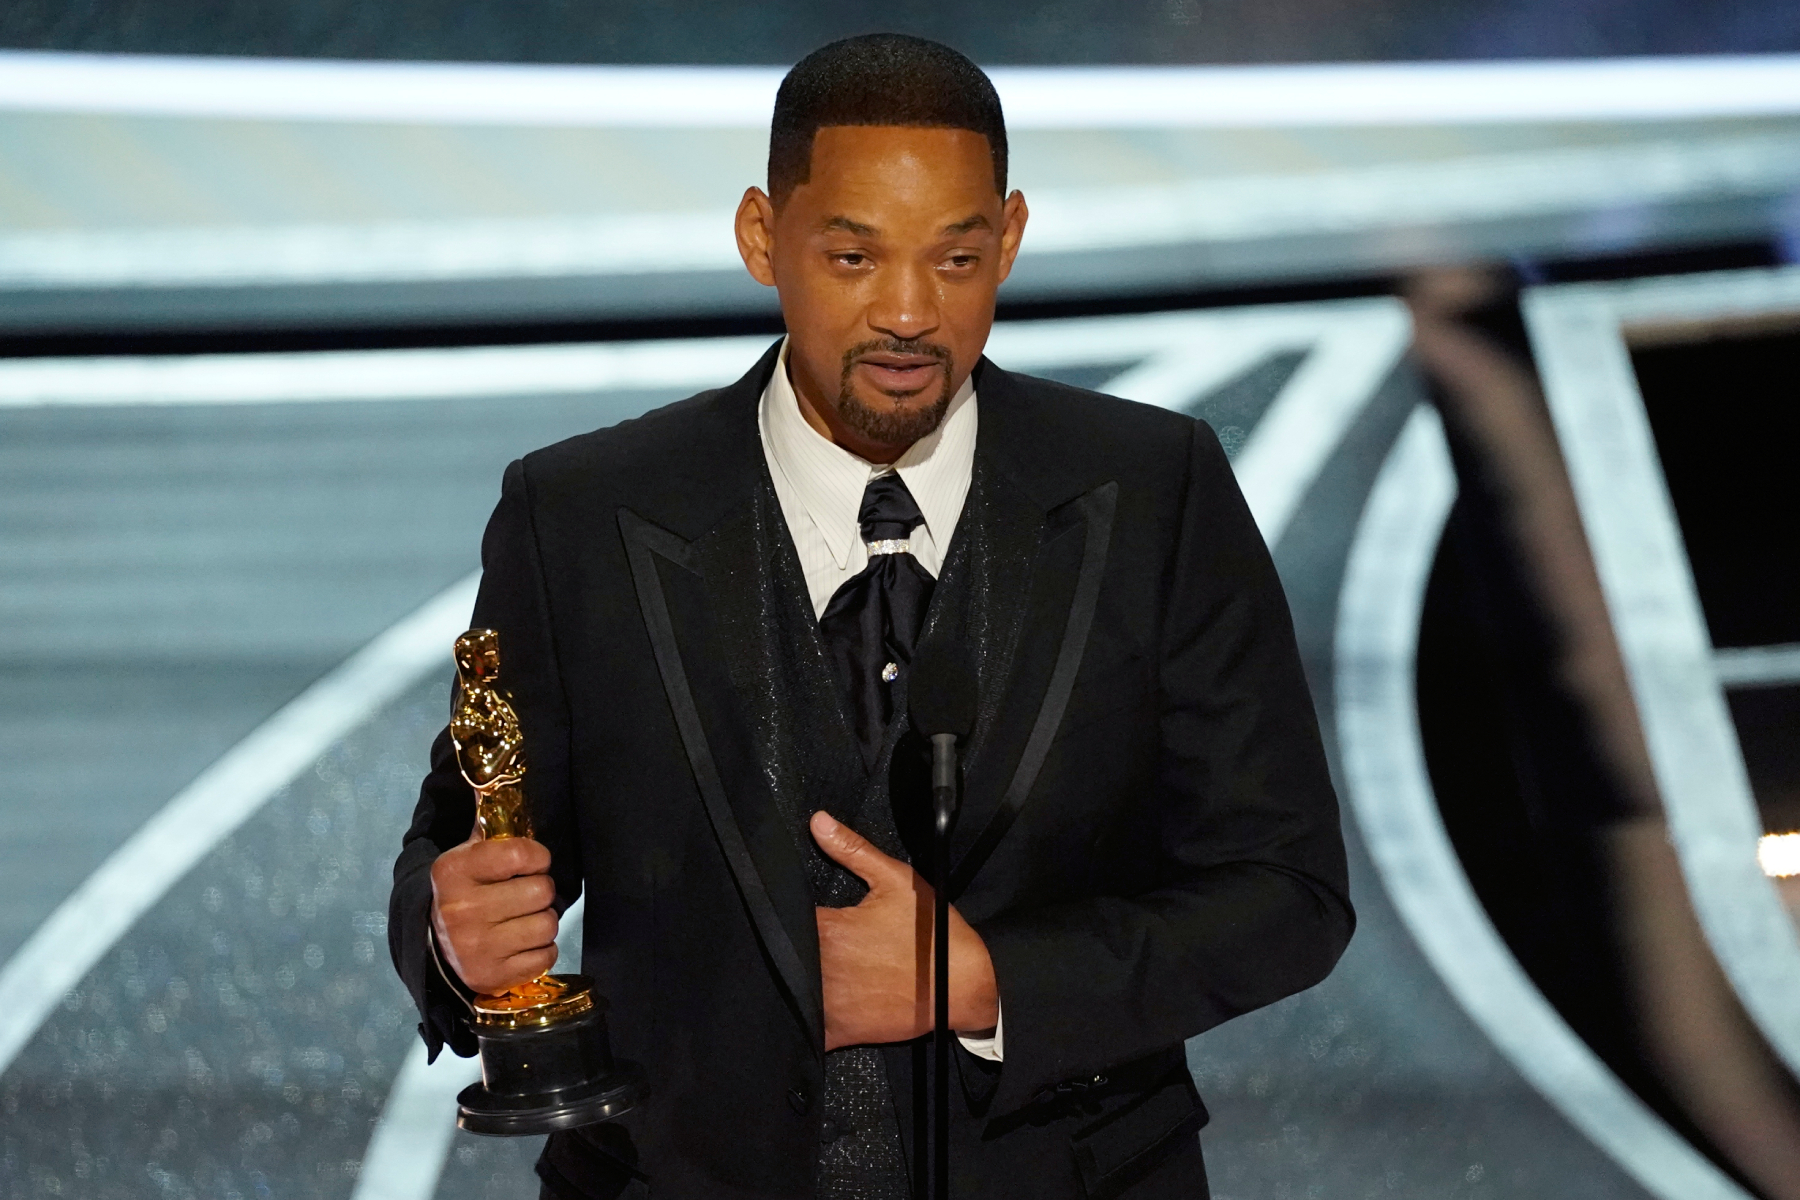 will Smith Refused To Leave Oscars After Slap Academy Claims Rolling Stone